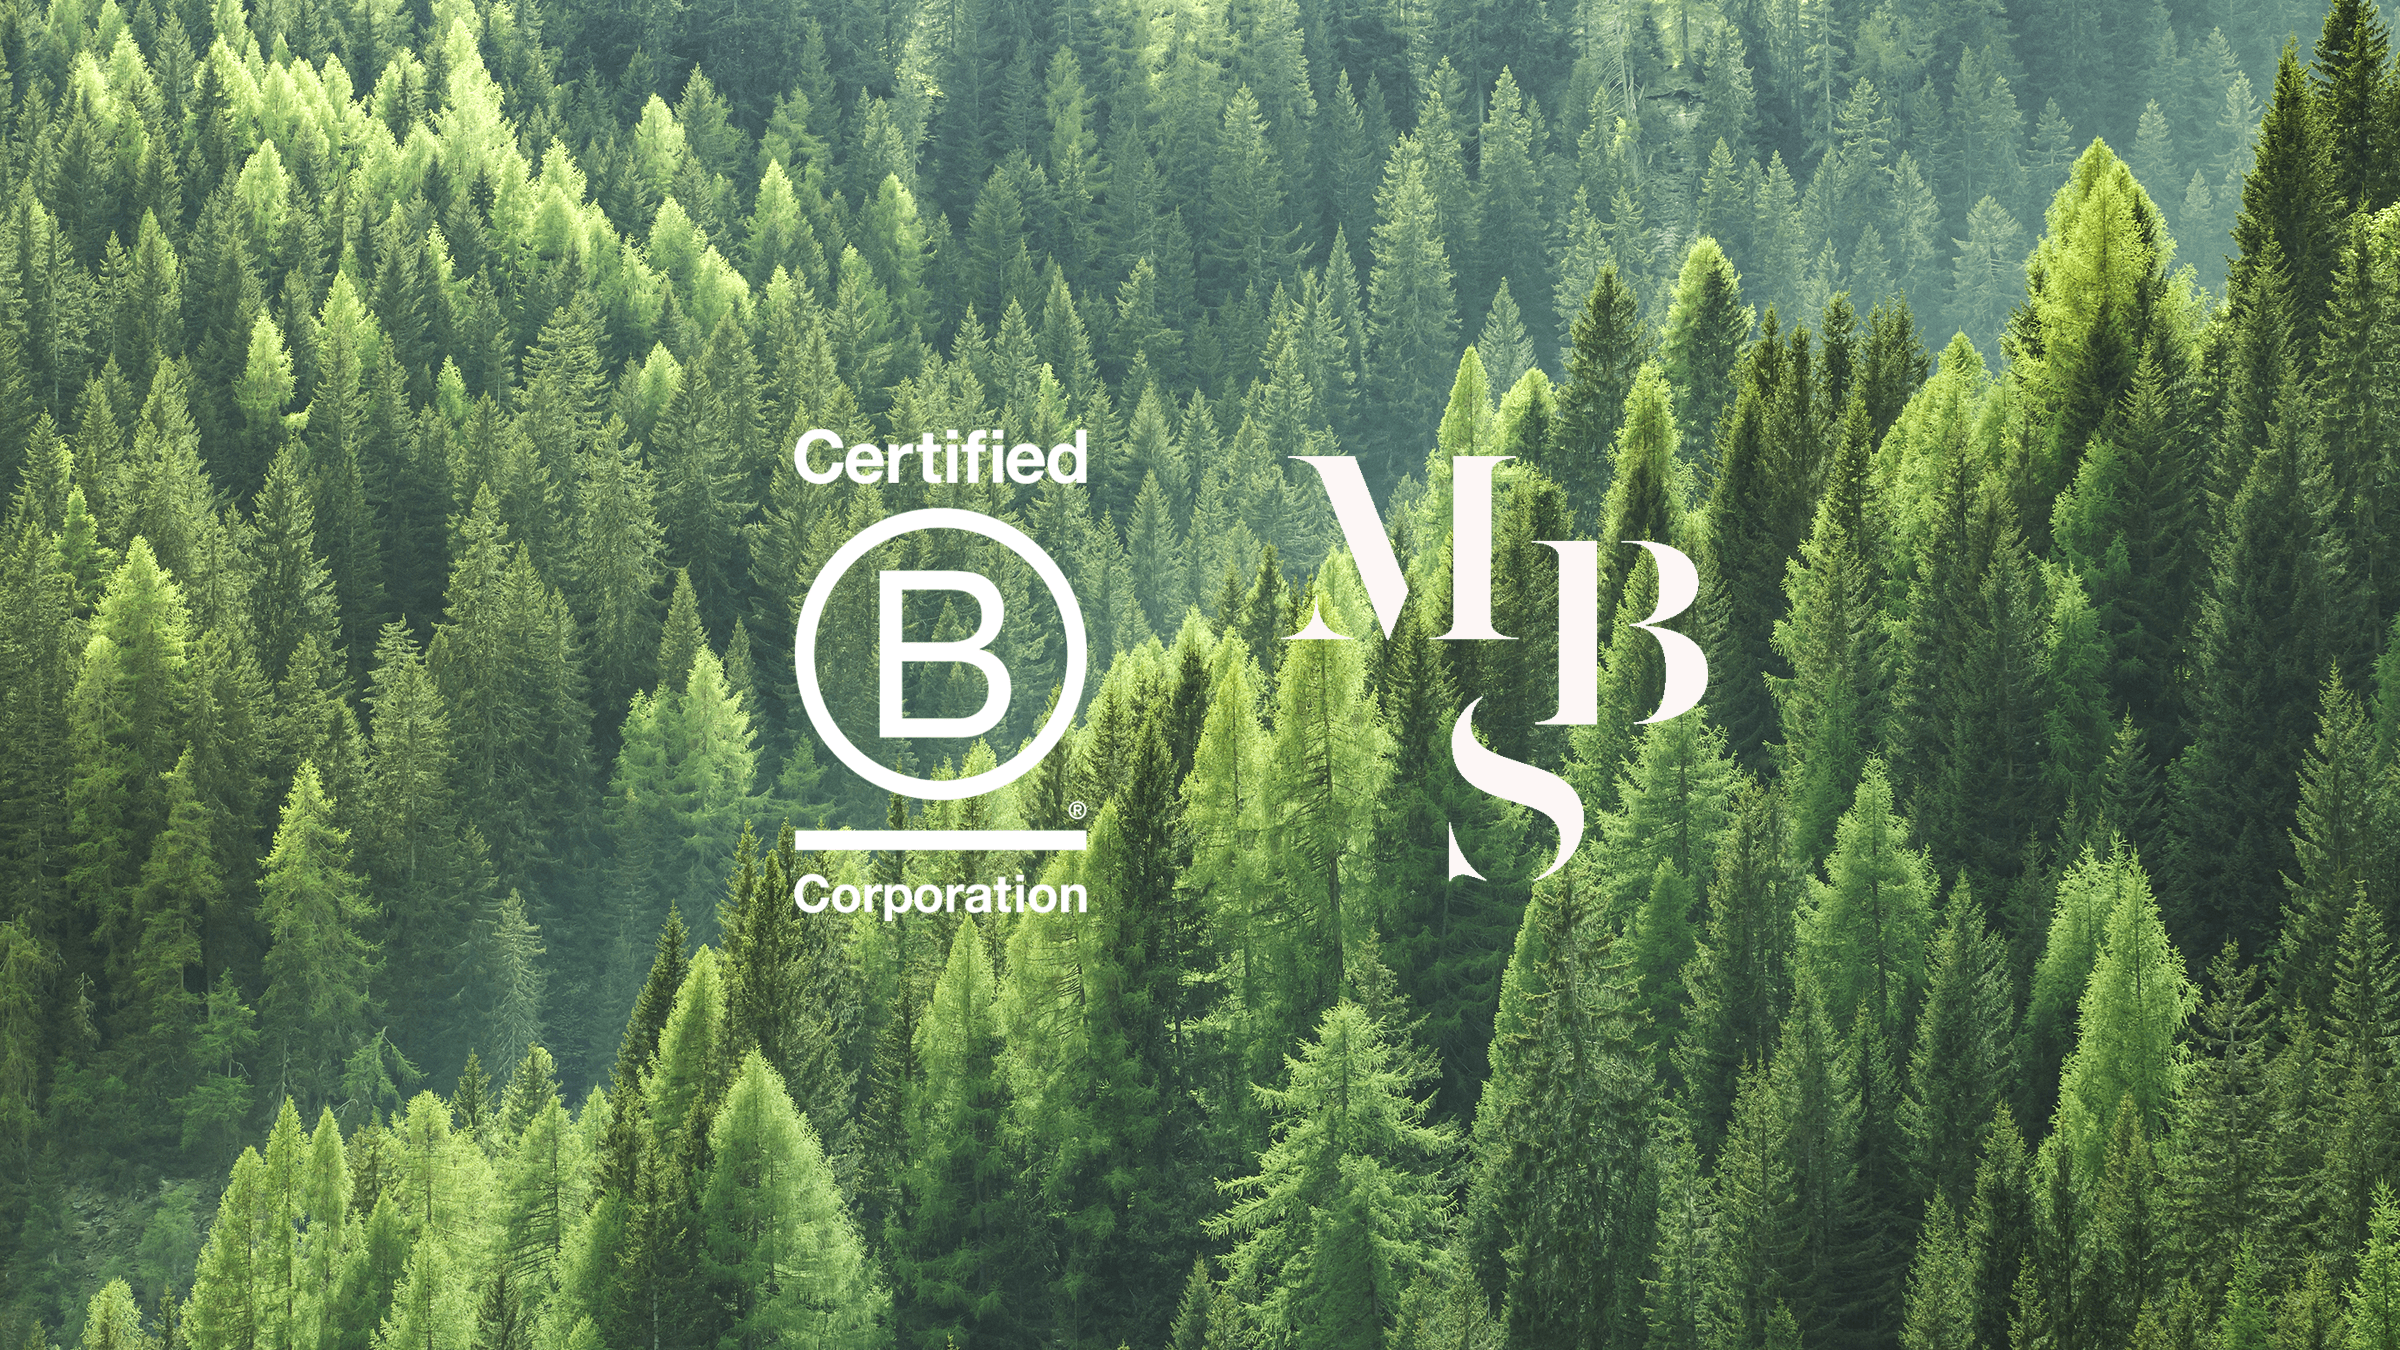 Gaining B Corp certification: MBS’s renewed commitment to play a role transforming the global economy to benefit all people, communities, and the planet